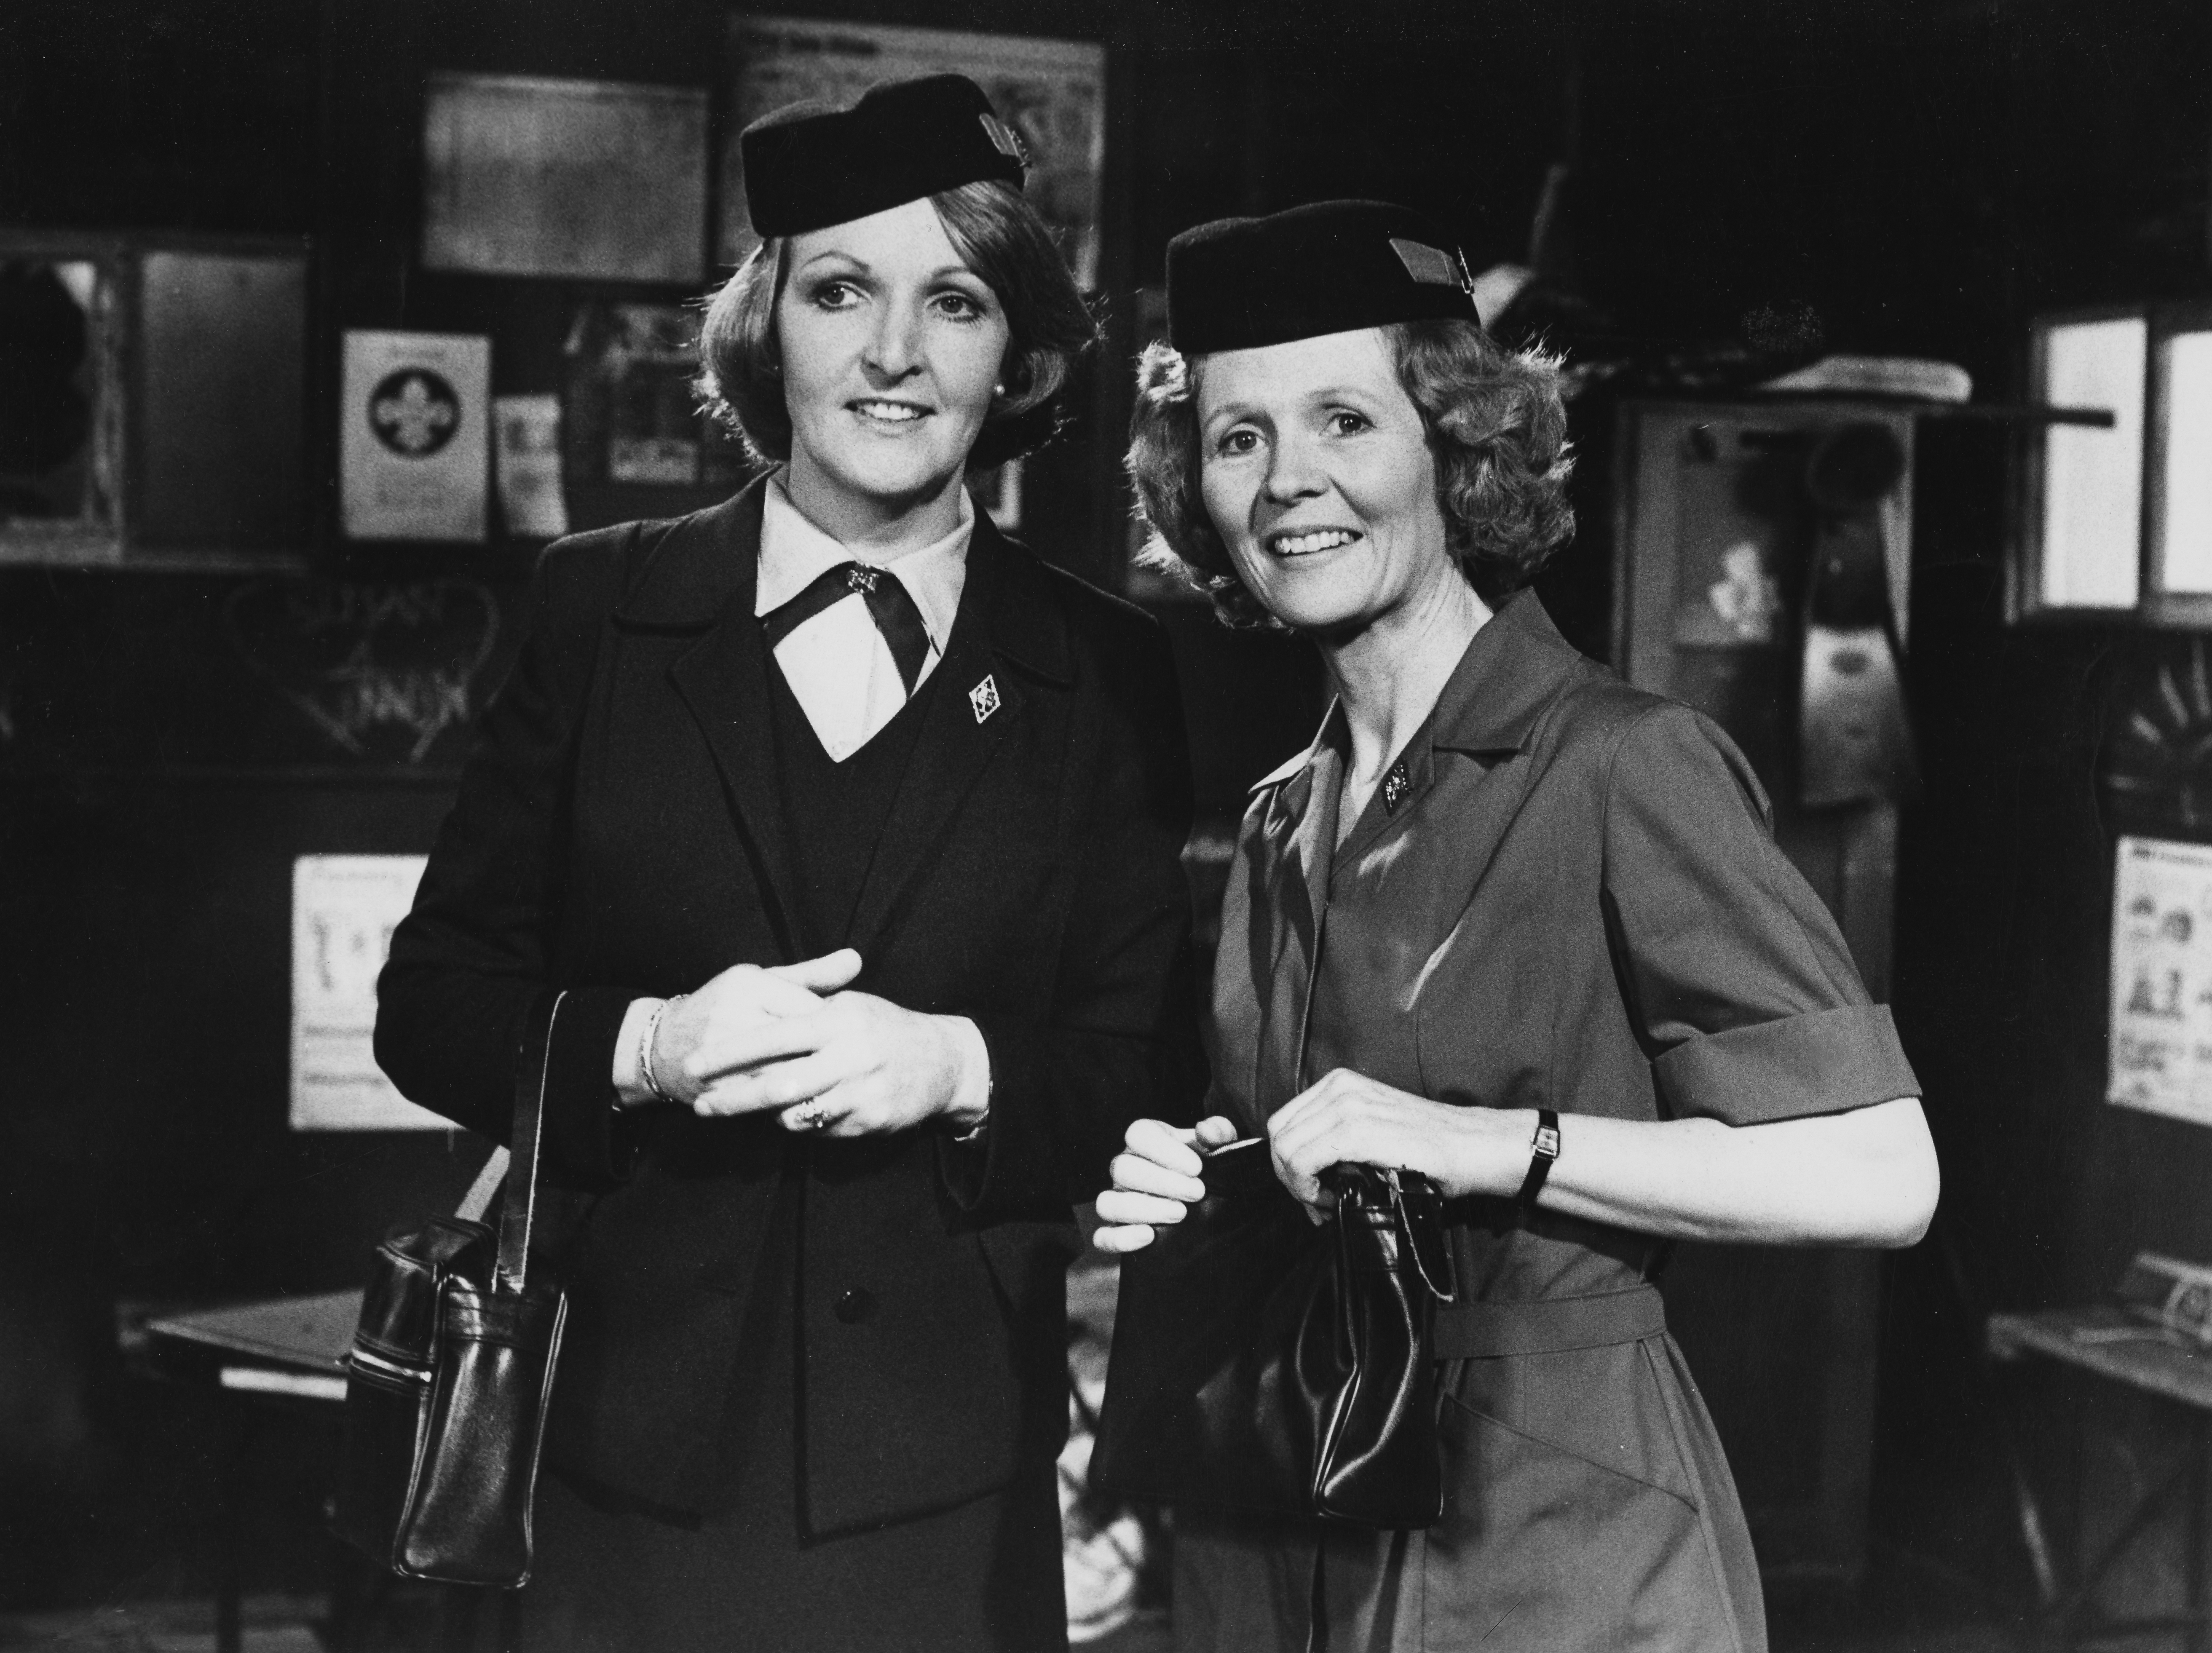 "Actresses Penelope Keith (left) and Angela Thorne in a scene from the television sitcom 'To the Manor Born', October 4th 1981. (Photo by Don Smith/Radio Times/Getty Images)"